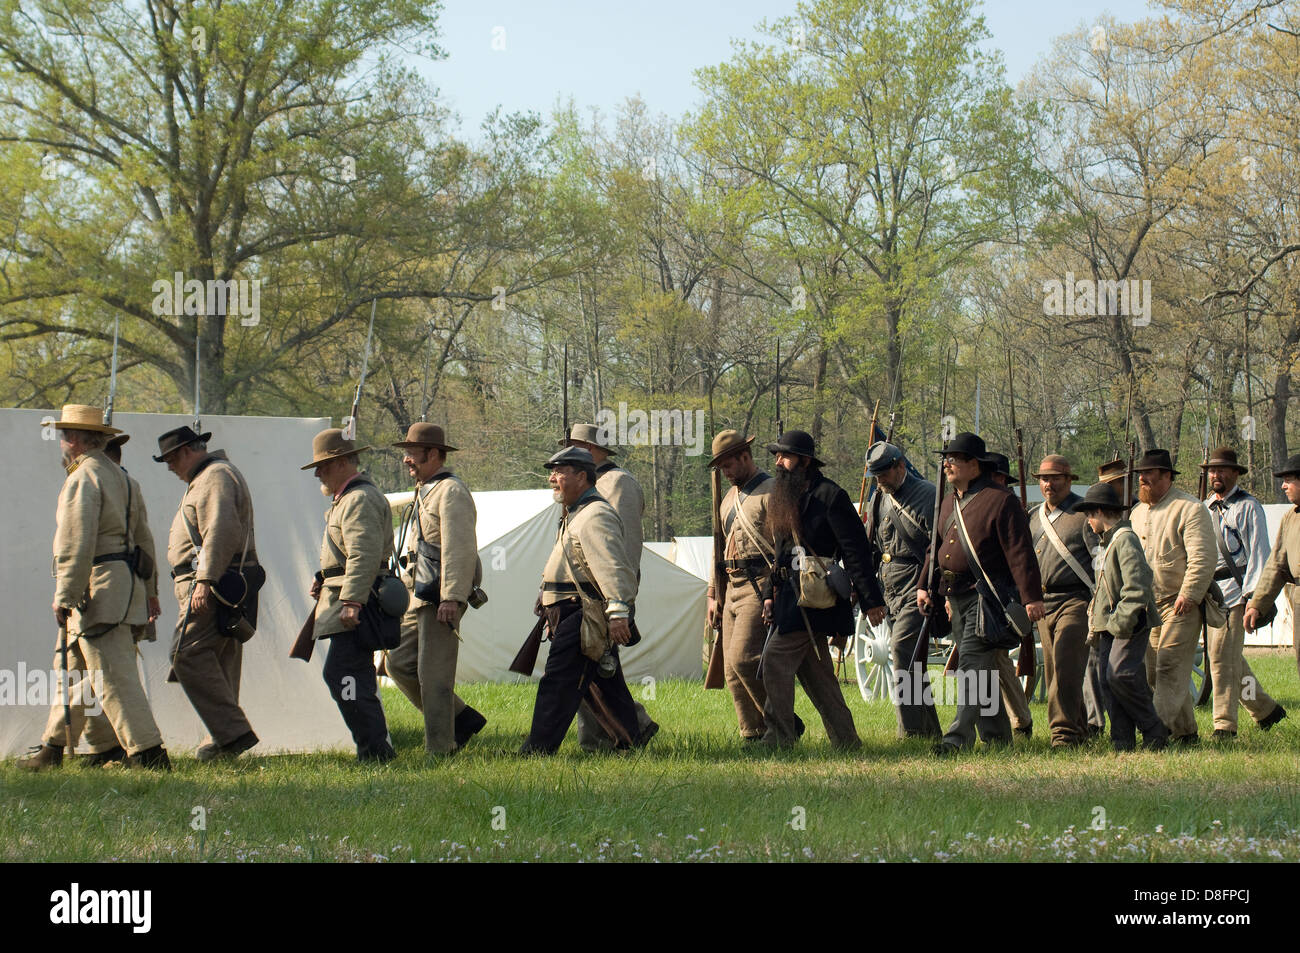 Confederate reenactors marching from camp, Shiloh National Military Park, Tennessee. Digital photograph Stock Photo